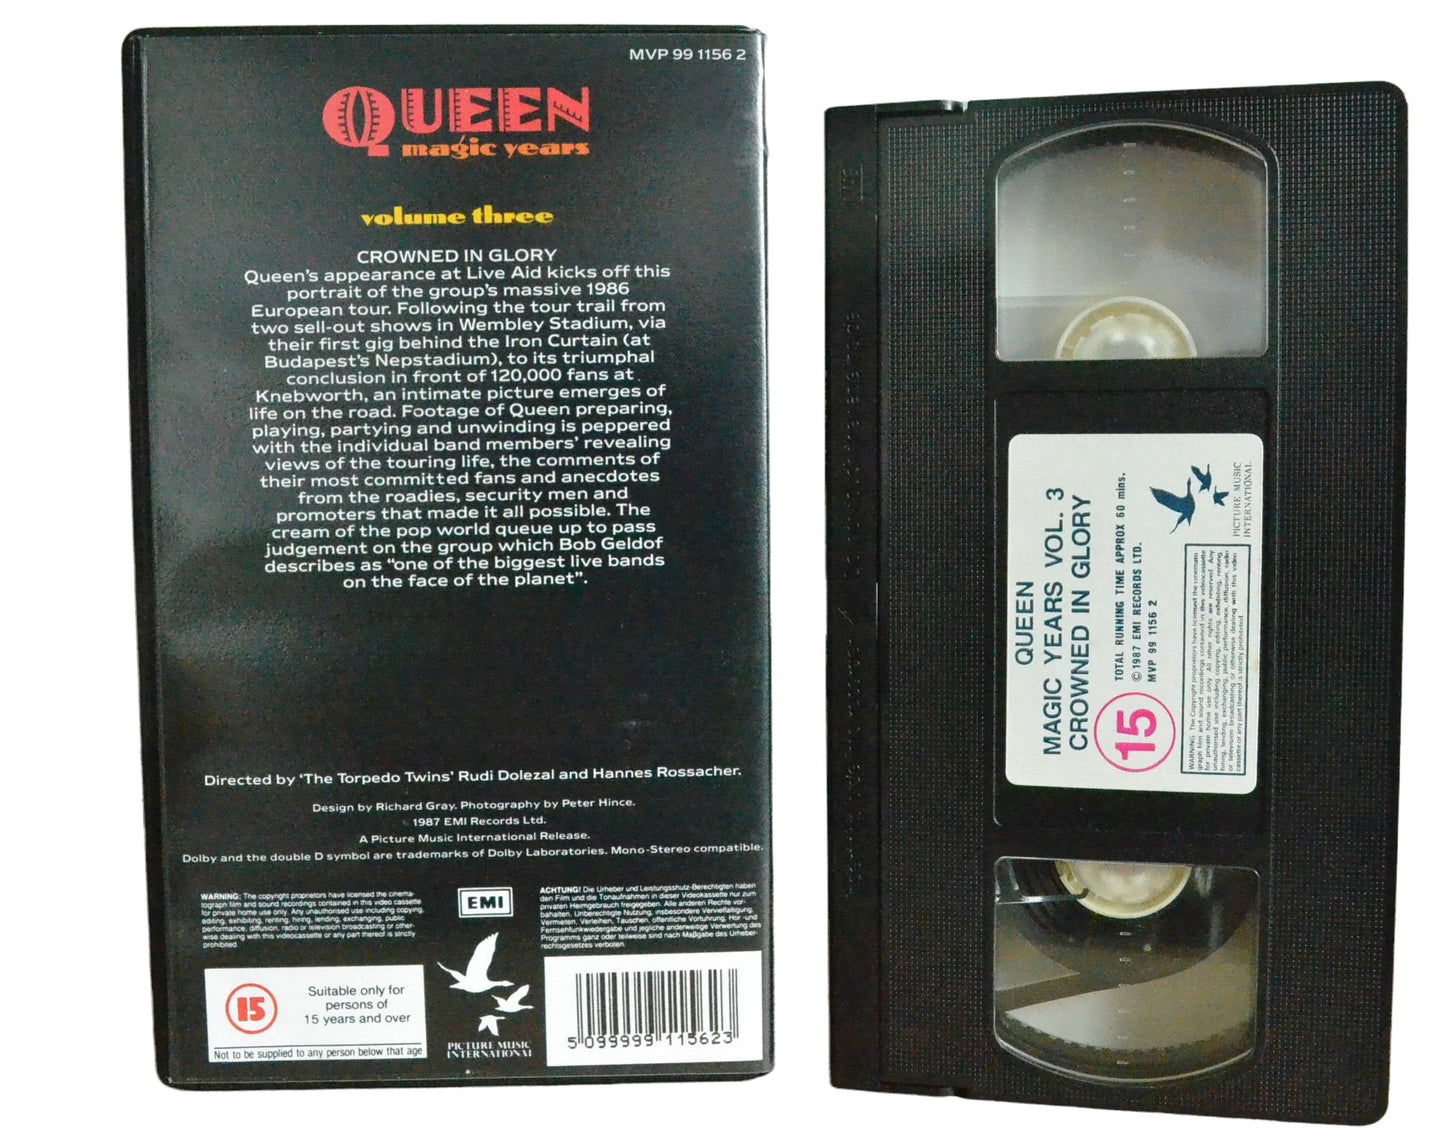 Queen Magic Years Vol. 3 - Crowned In Glory - Michael Appleton - Picture Music International - Music - Pal VHS-